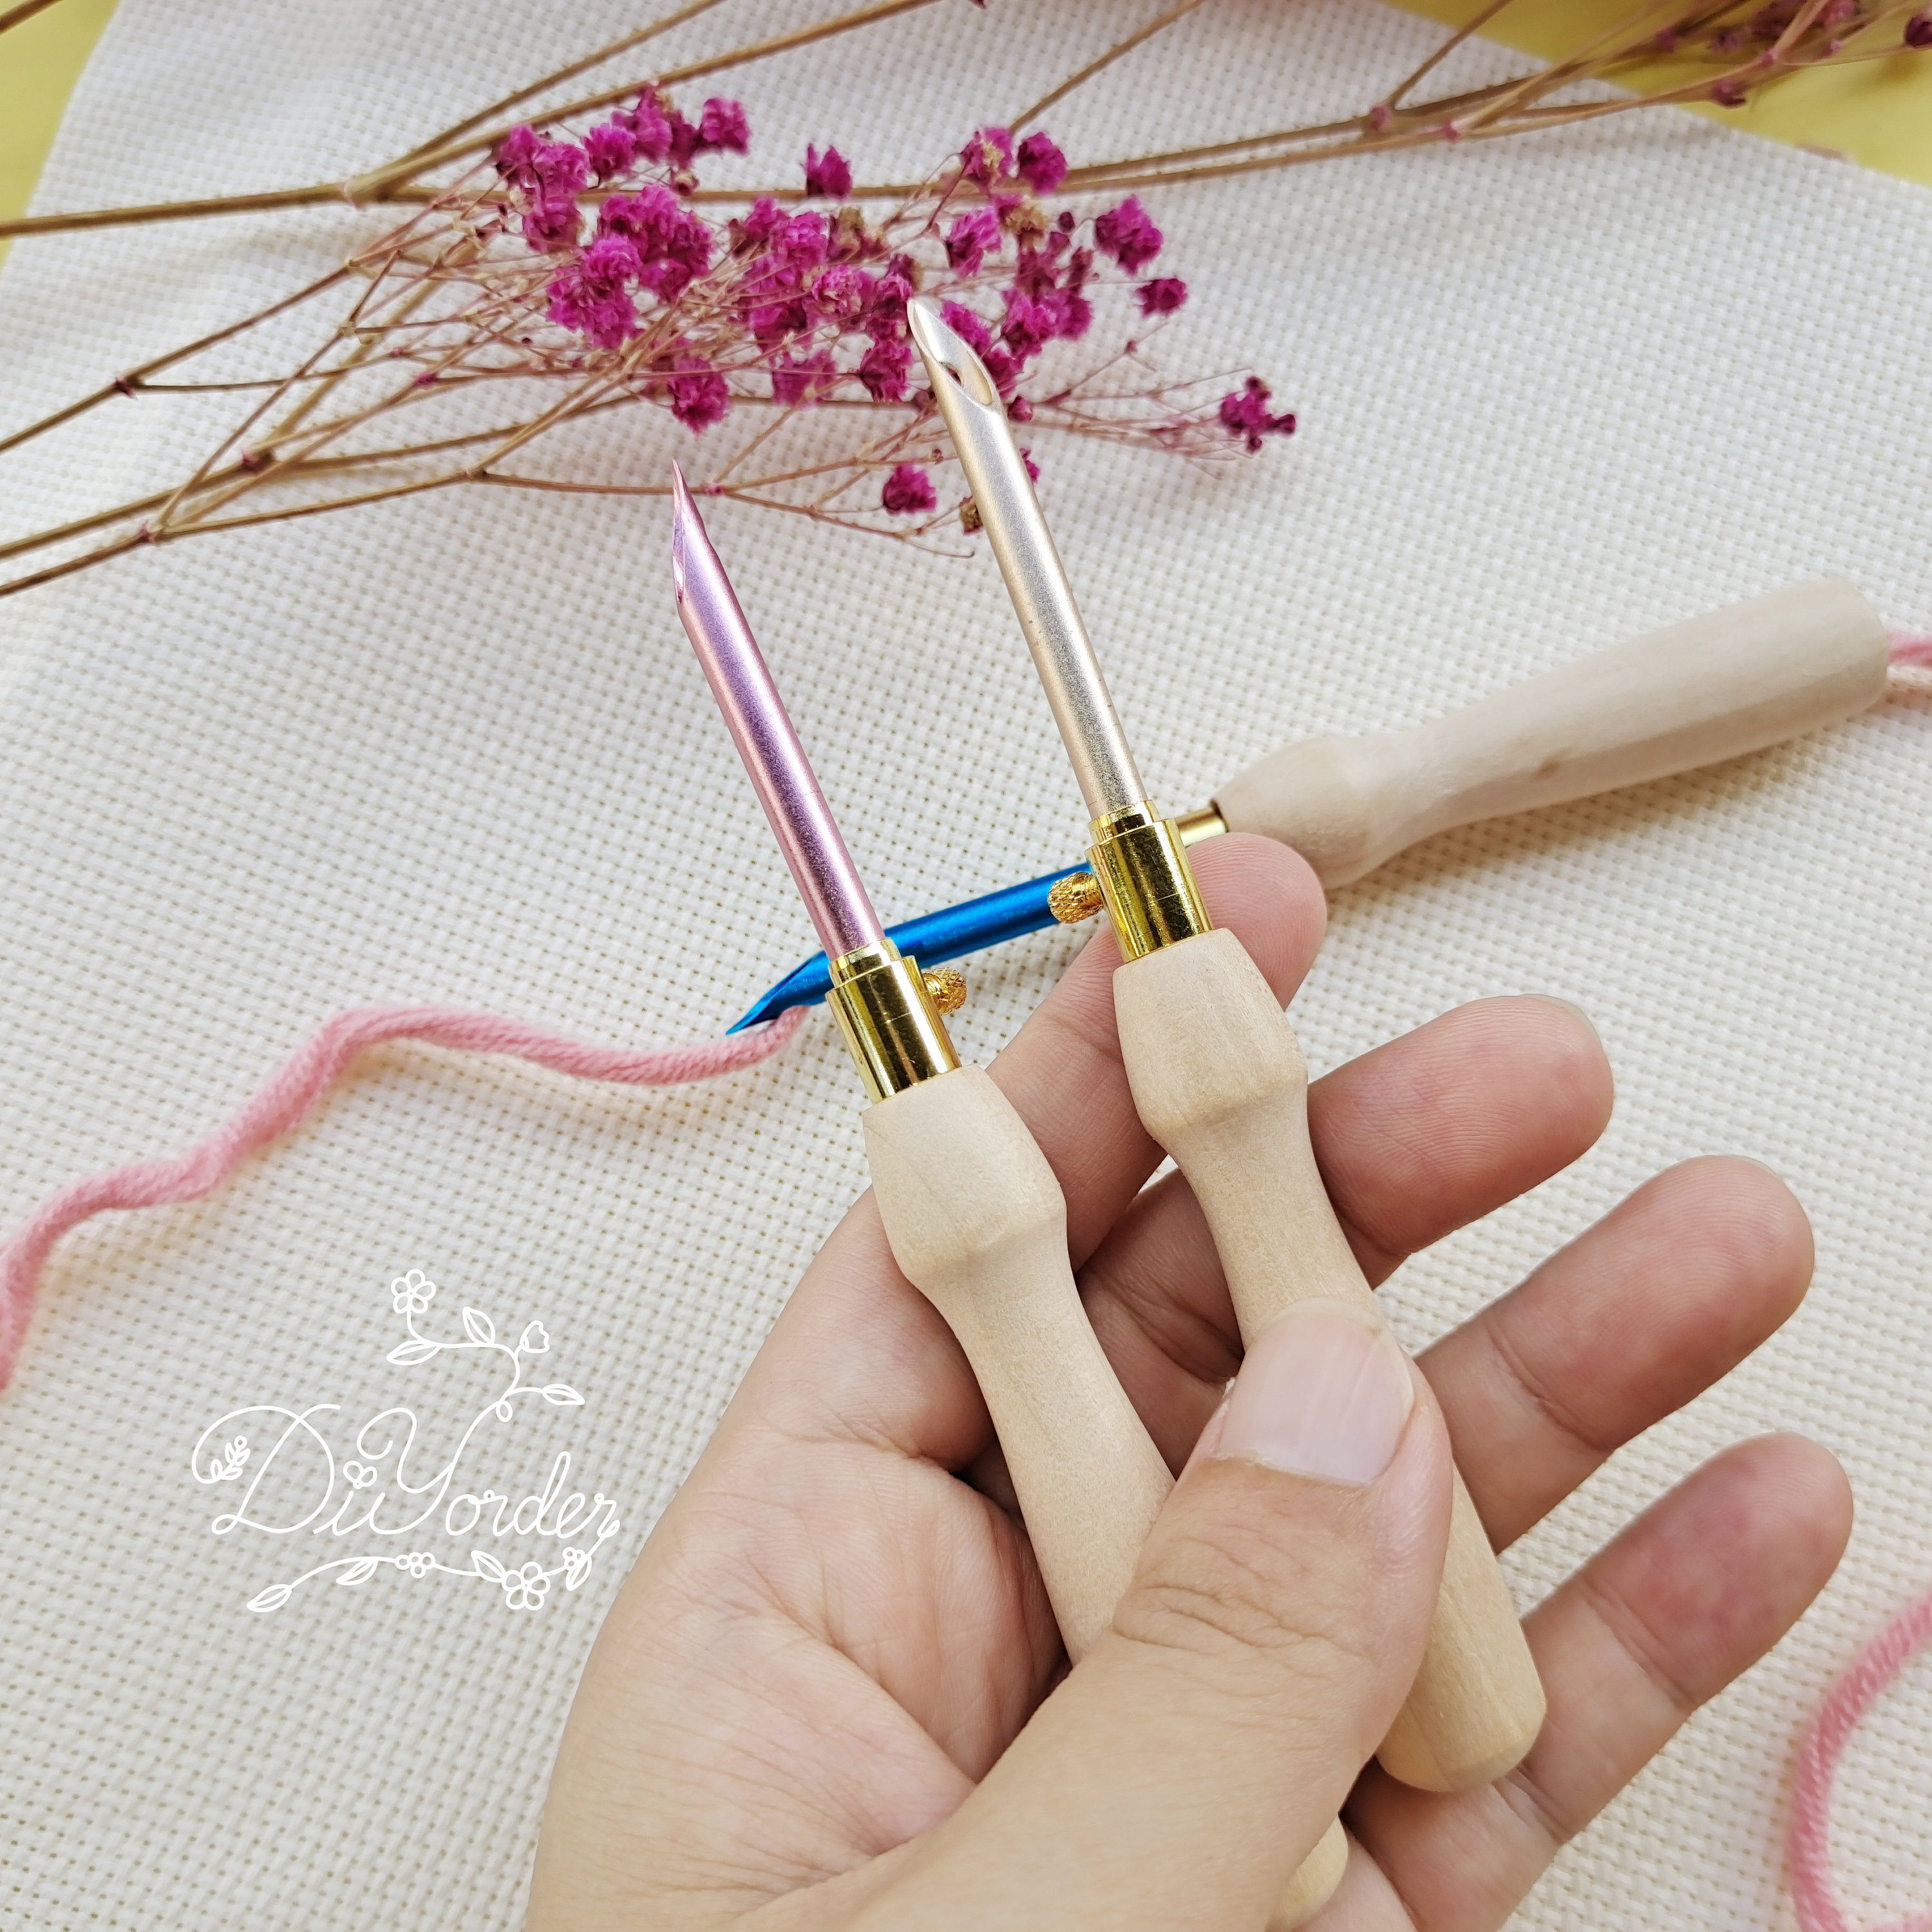 3 Size Adjustable Punch Needle, Punch Needle Set, Punch Needle Embroidery  for Beginners, Christmas Gift for Crafters 